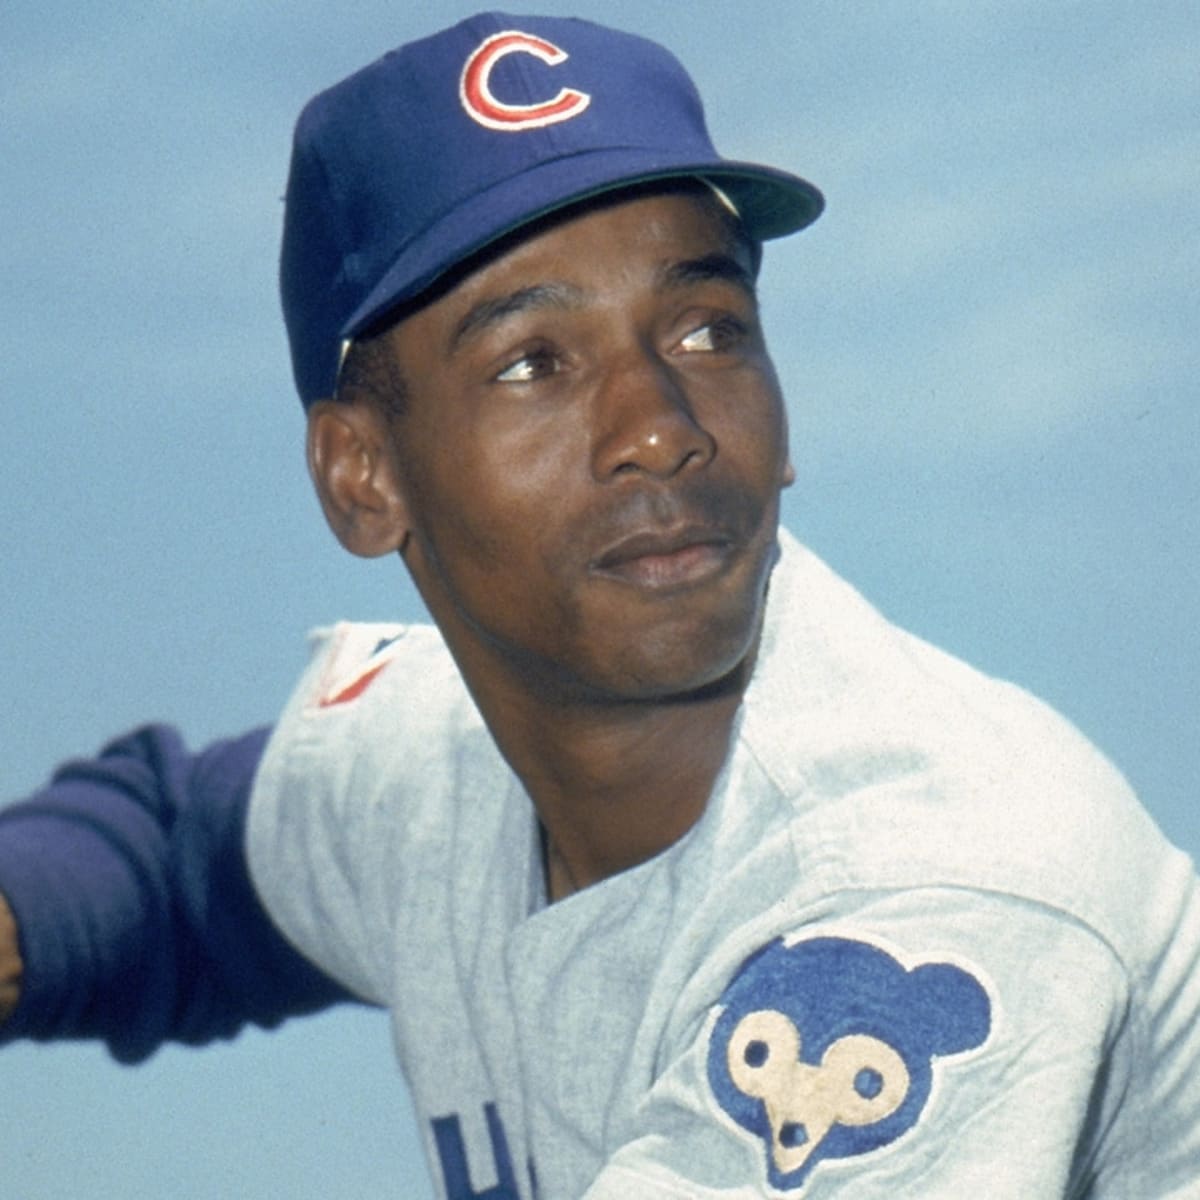 Ernie Banks: Quick look at his career